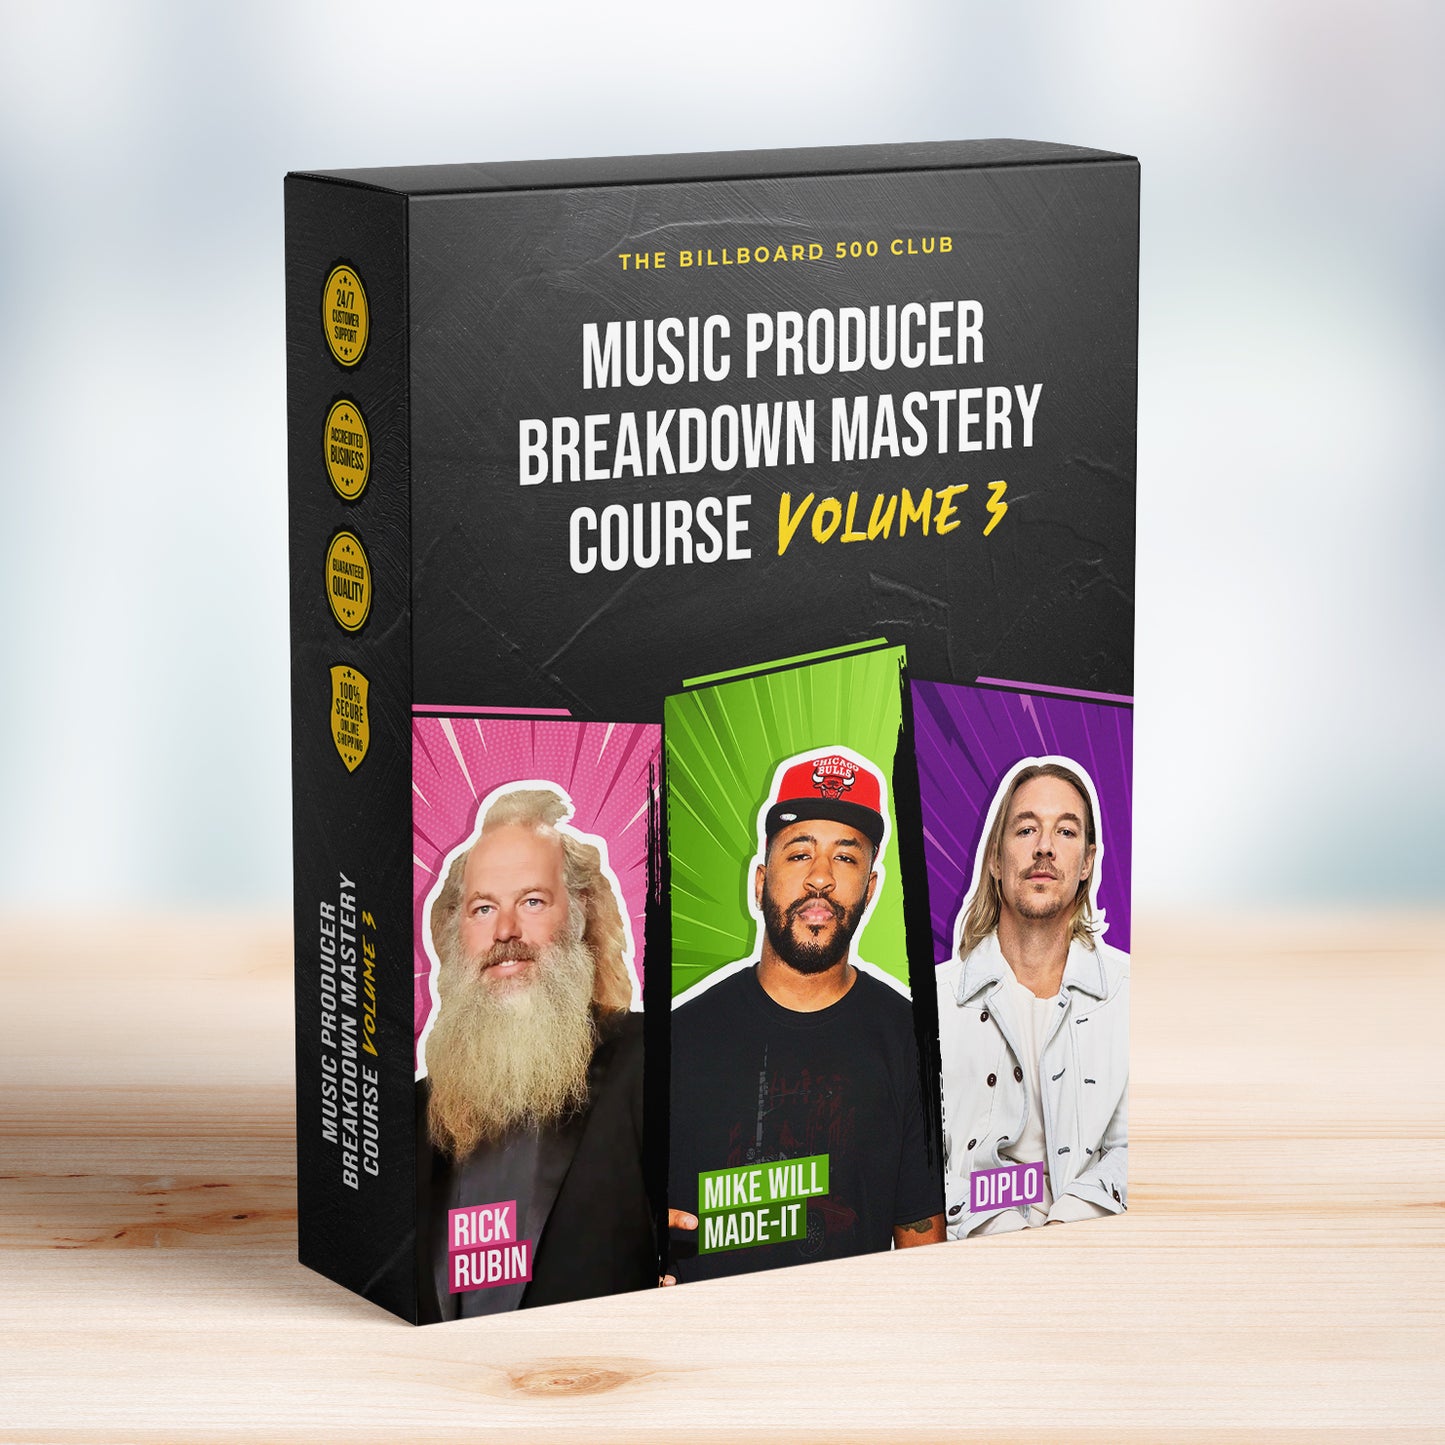 Music Producer Breakdown Mastery Course Volume 3 - Rick Rubin, Mike Will Made-It, Diplo - The Billboard 500 Club